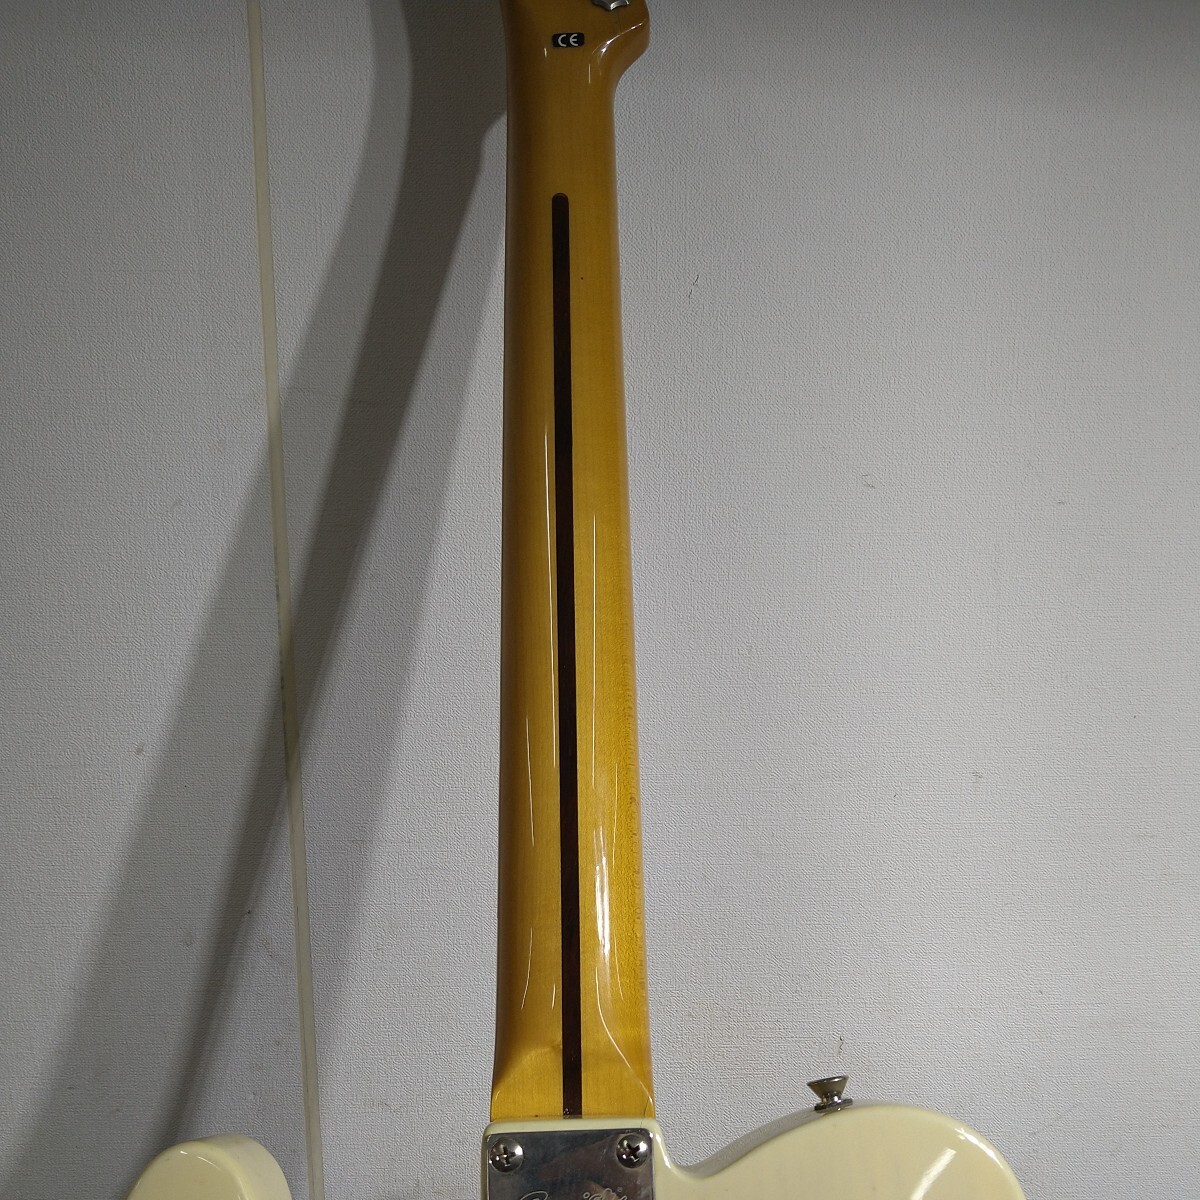 OS015.型番:Squier.0423. Squier by Fender .Telecaster .傷あり.ジャンク_画像6